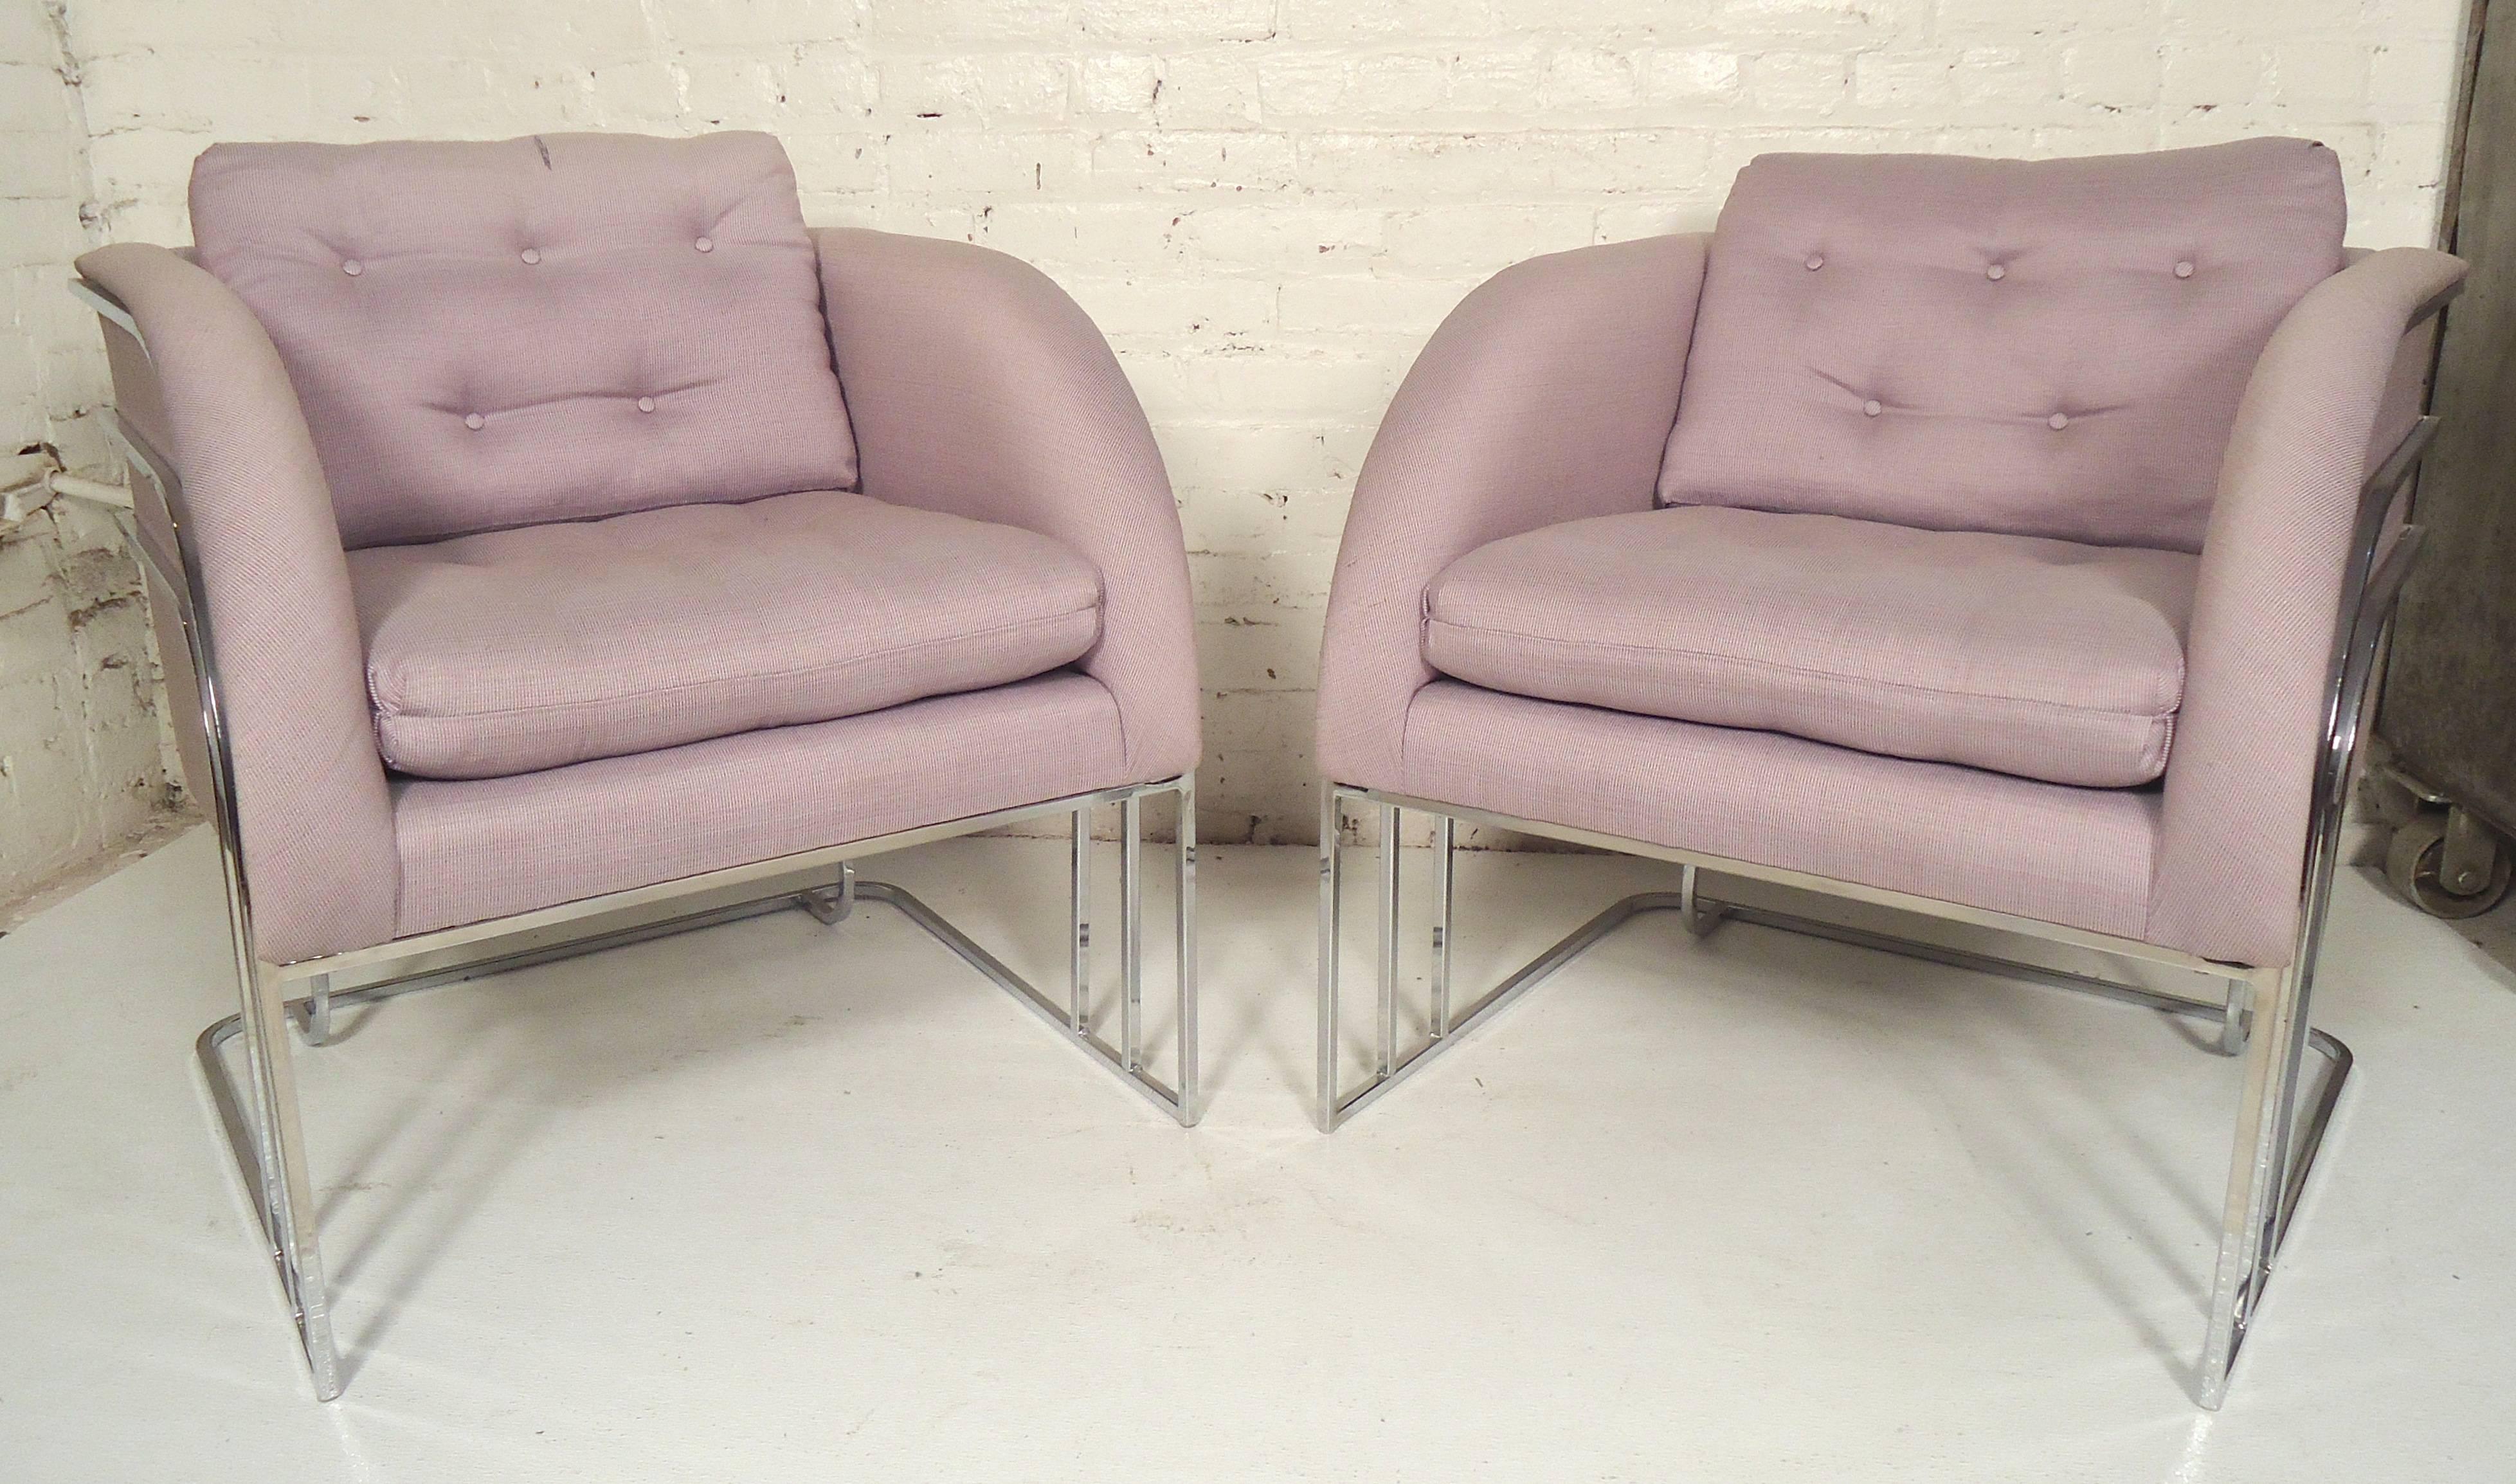 Fantastic polished Mid-Century Modern chairs George Mergenov for Weiman/Warren Lloyd. Great fan shape sides with a deco style design.

(Please confirm item location - NY or NJ - with dealer).